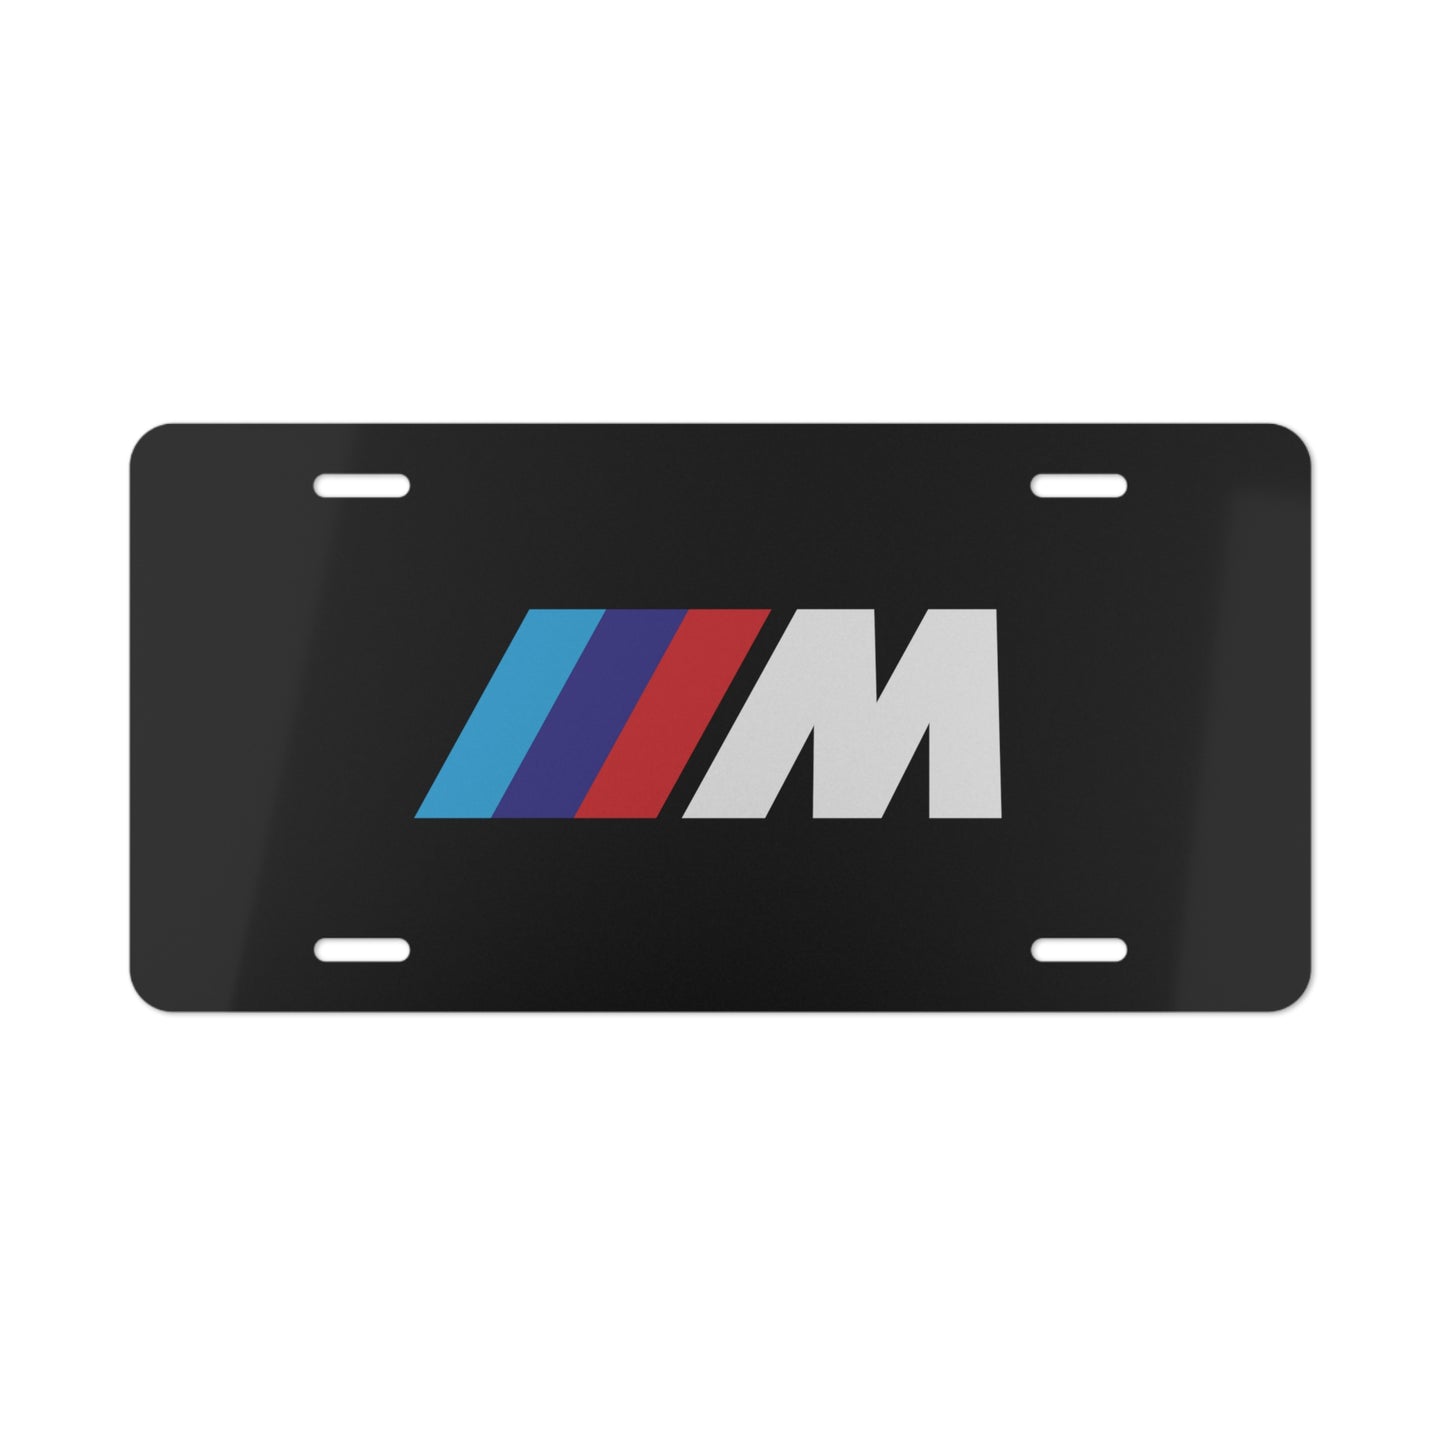 BMW ///M License Plate Covers